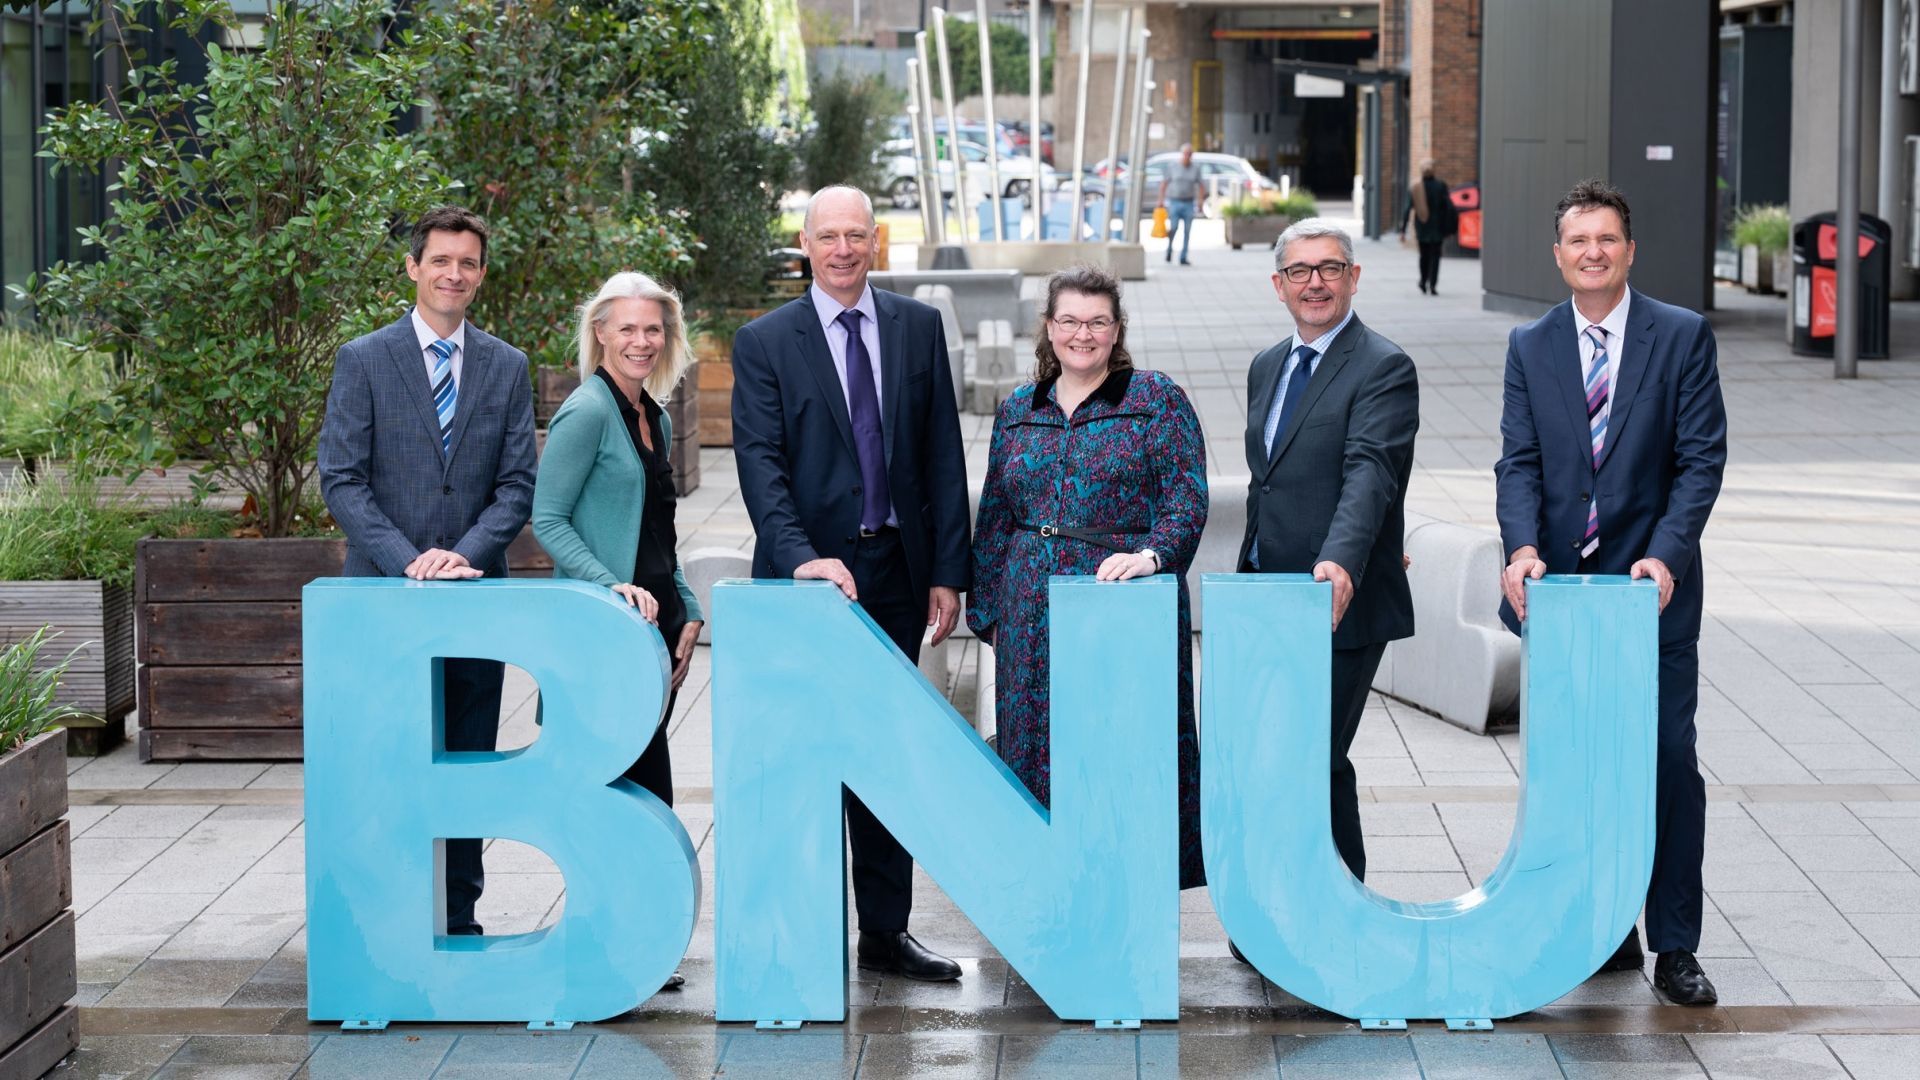 All 6 members of the University Executive Team stood around the BNU letters on the concourse